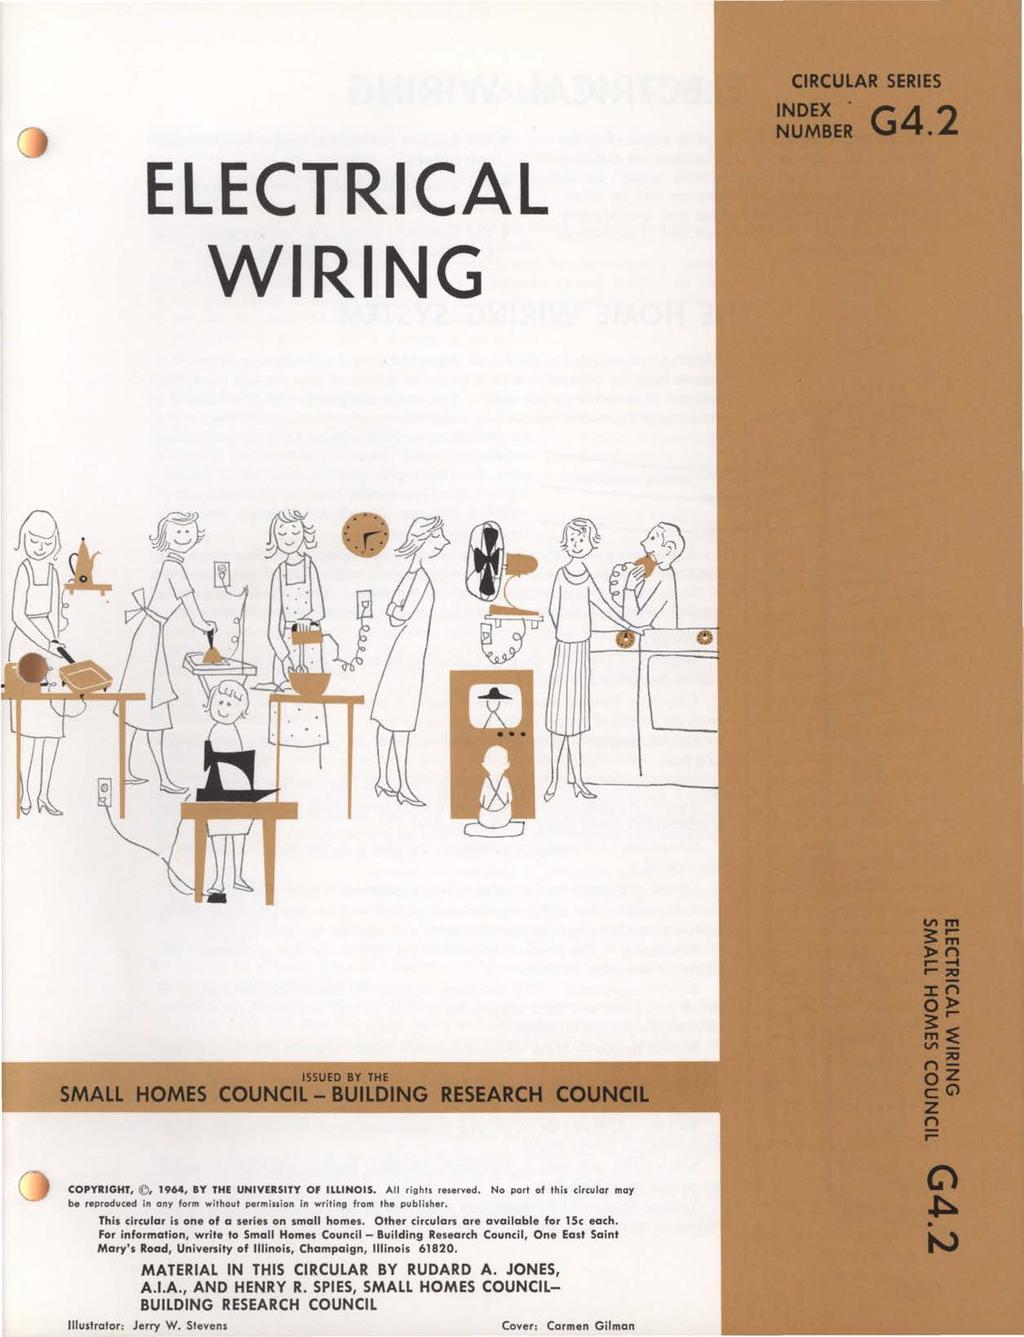 SERIES 4.2 ELECTRICAL WIRING ISSUED BY THE SMALL HOMES COUNCIL - BUILDING RESEARCH COPYRIGHT,, 1964, BY THE UNIVERSITY OF ILLINOIS. All rights reserved.